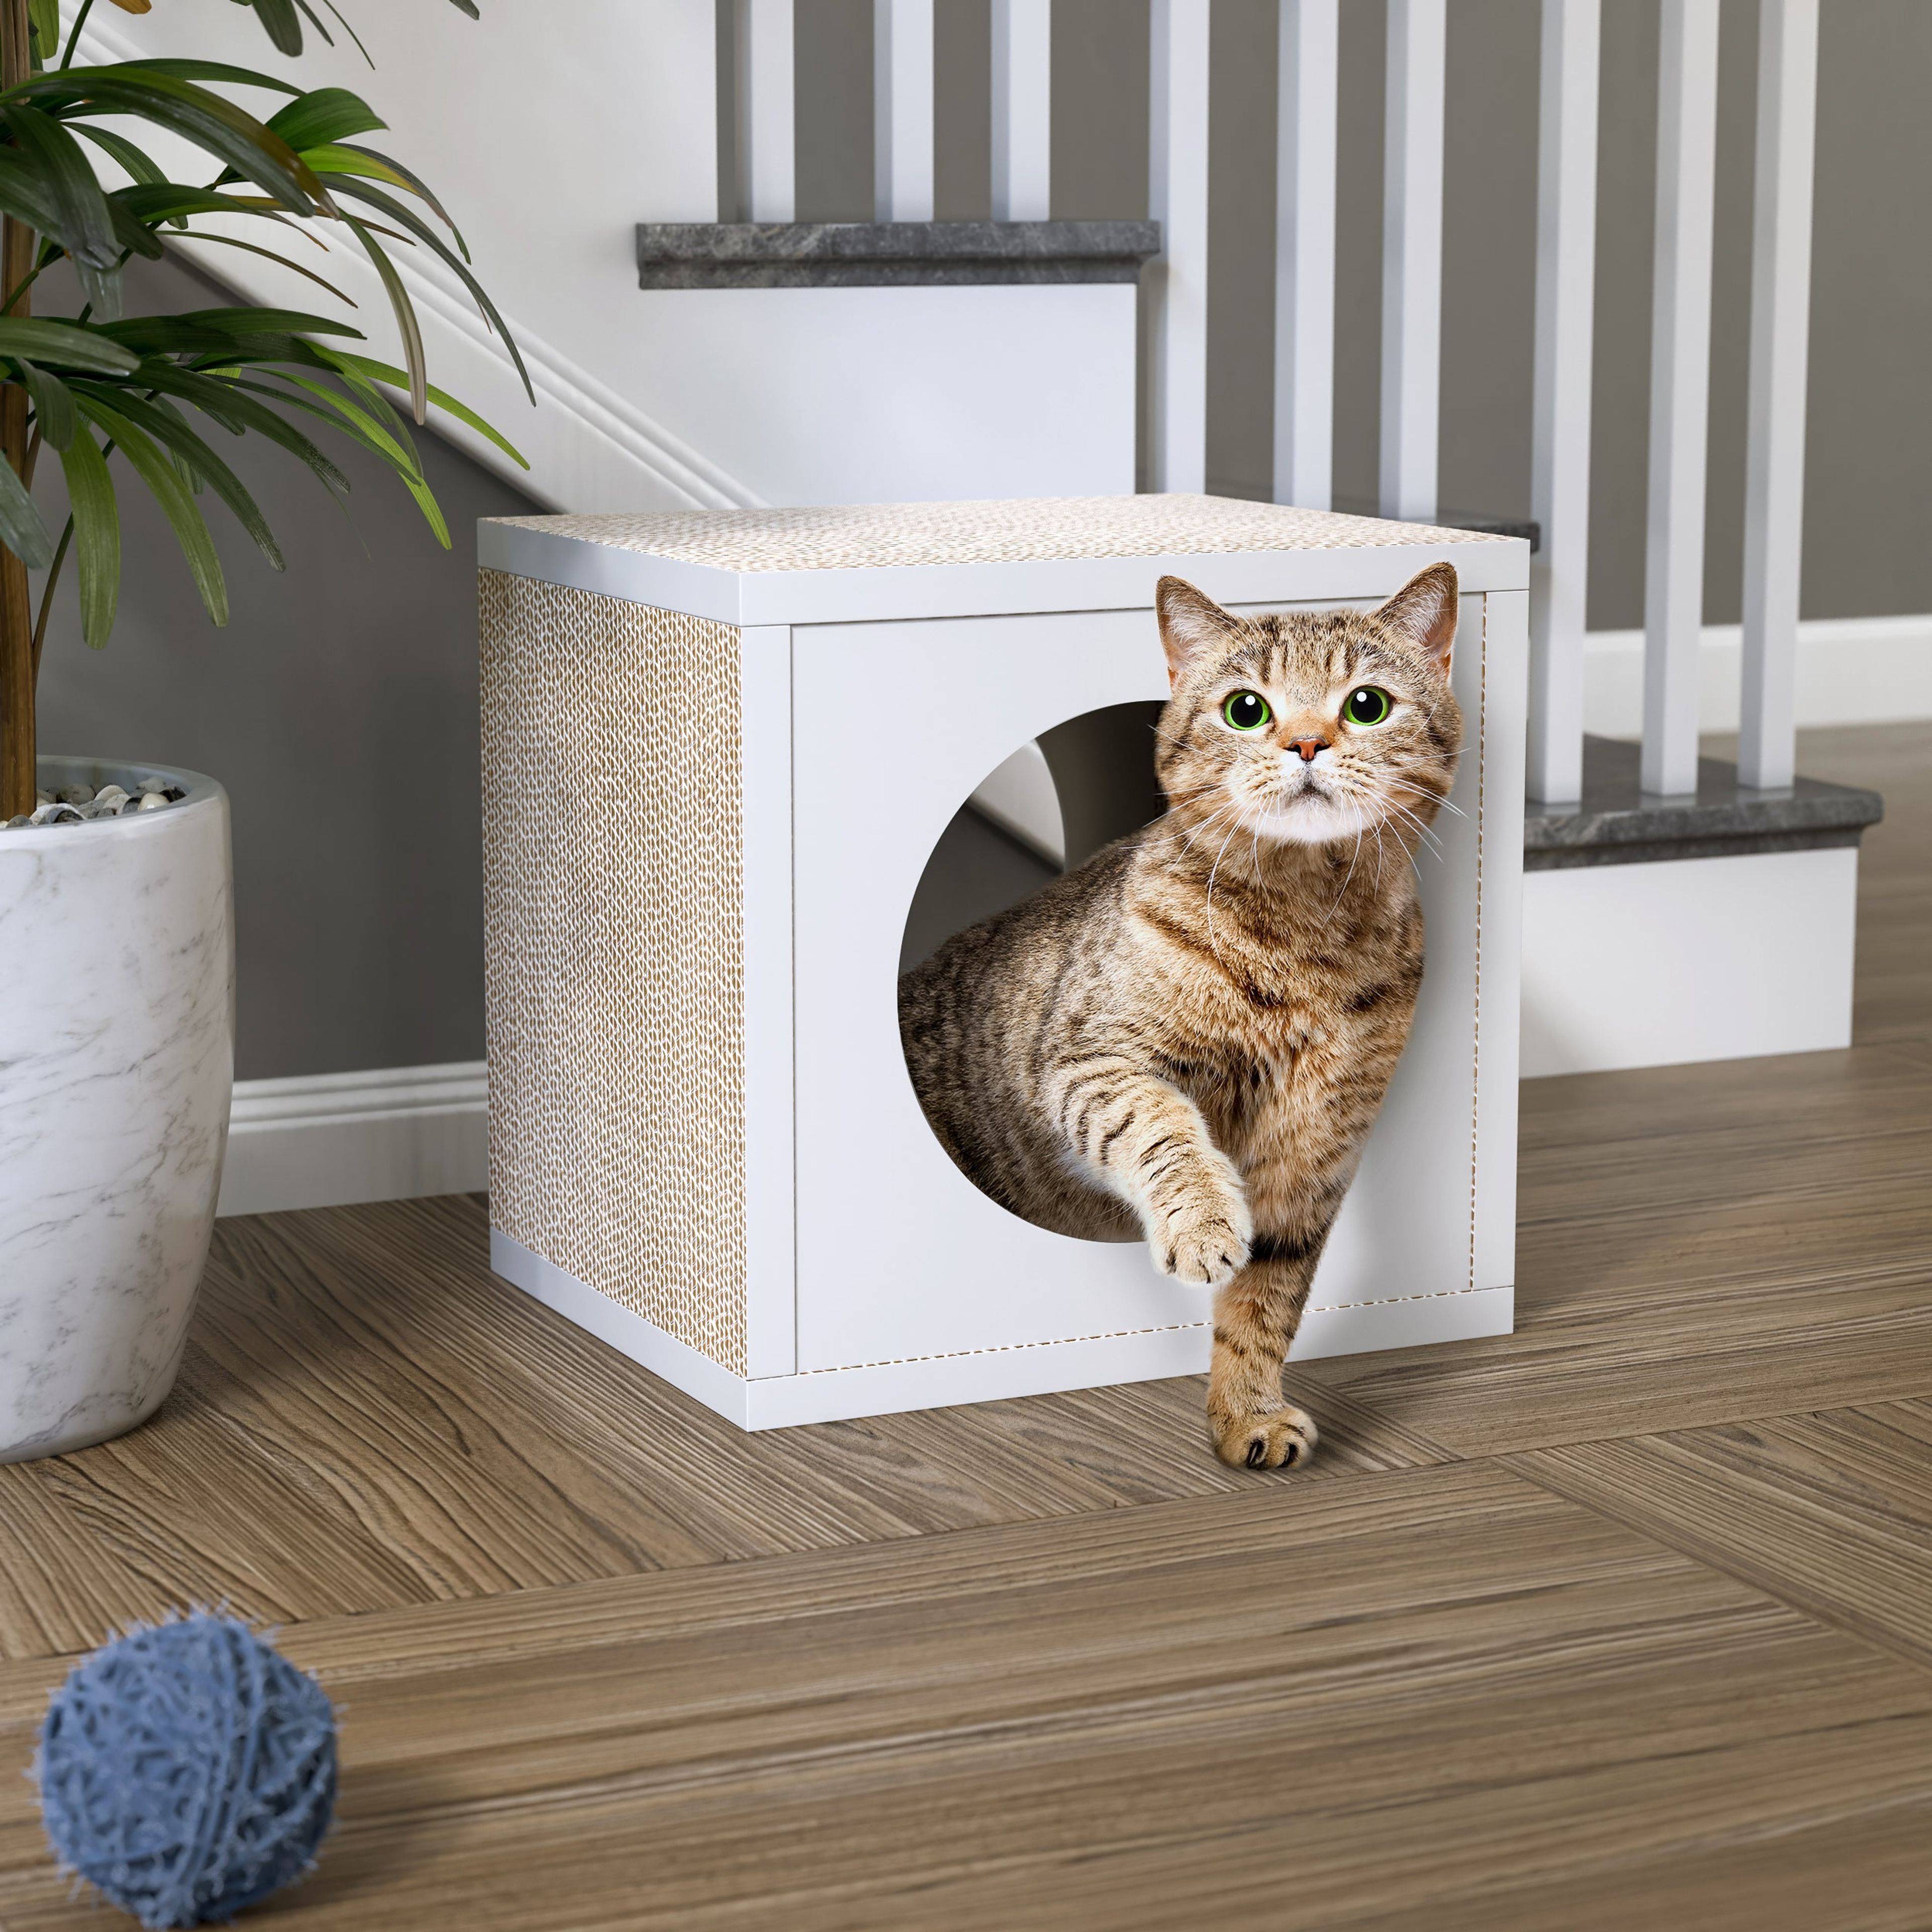 Katsquare Cube Scratching Post, White (New Color)